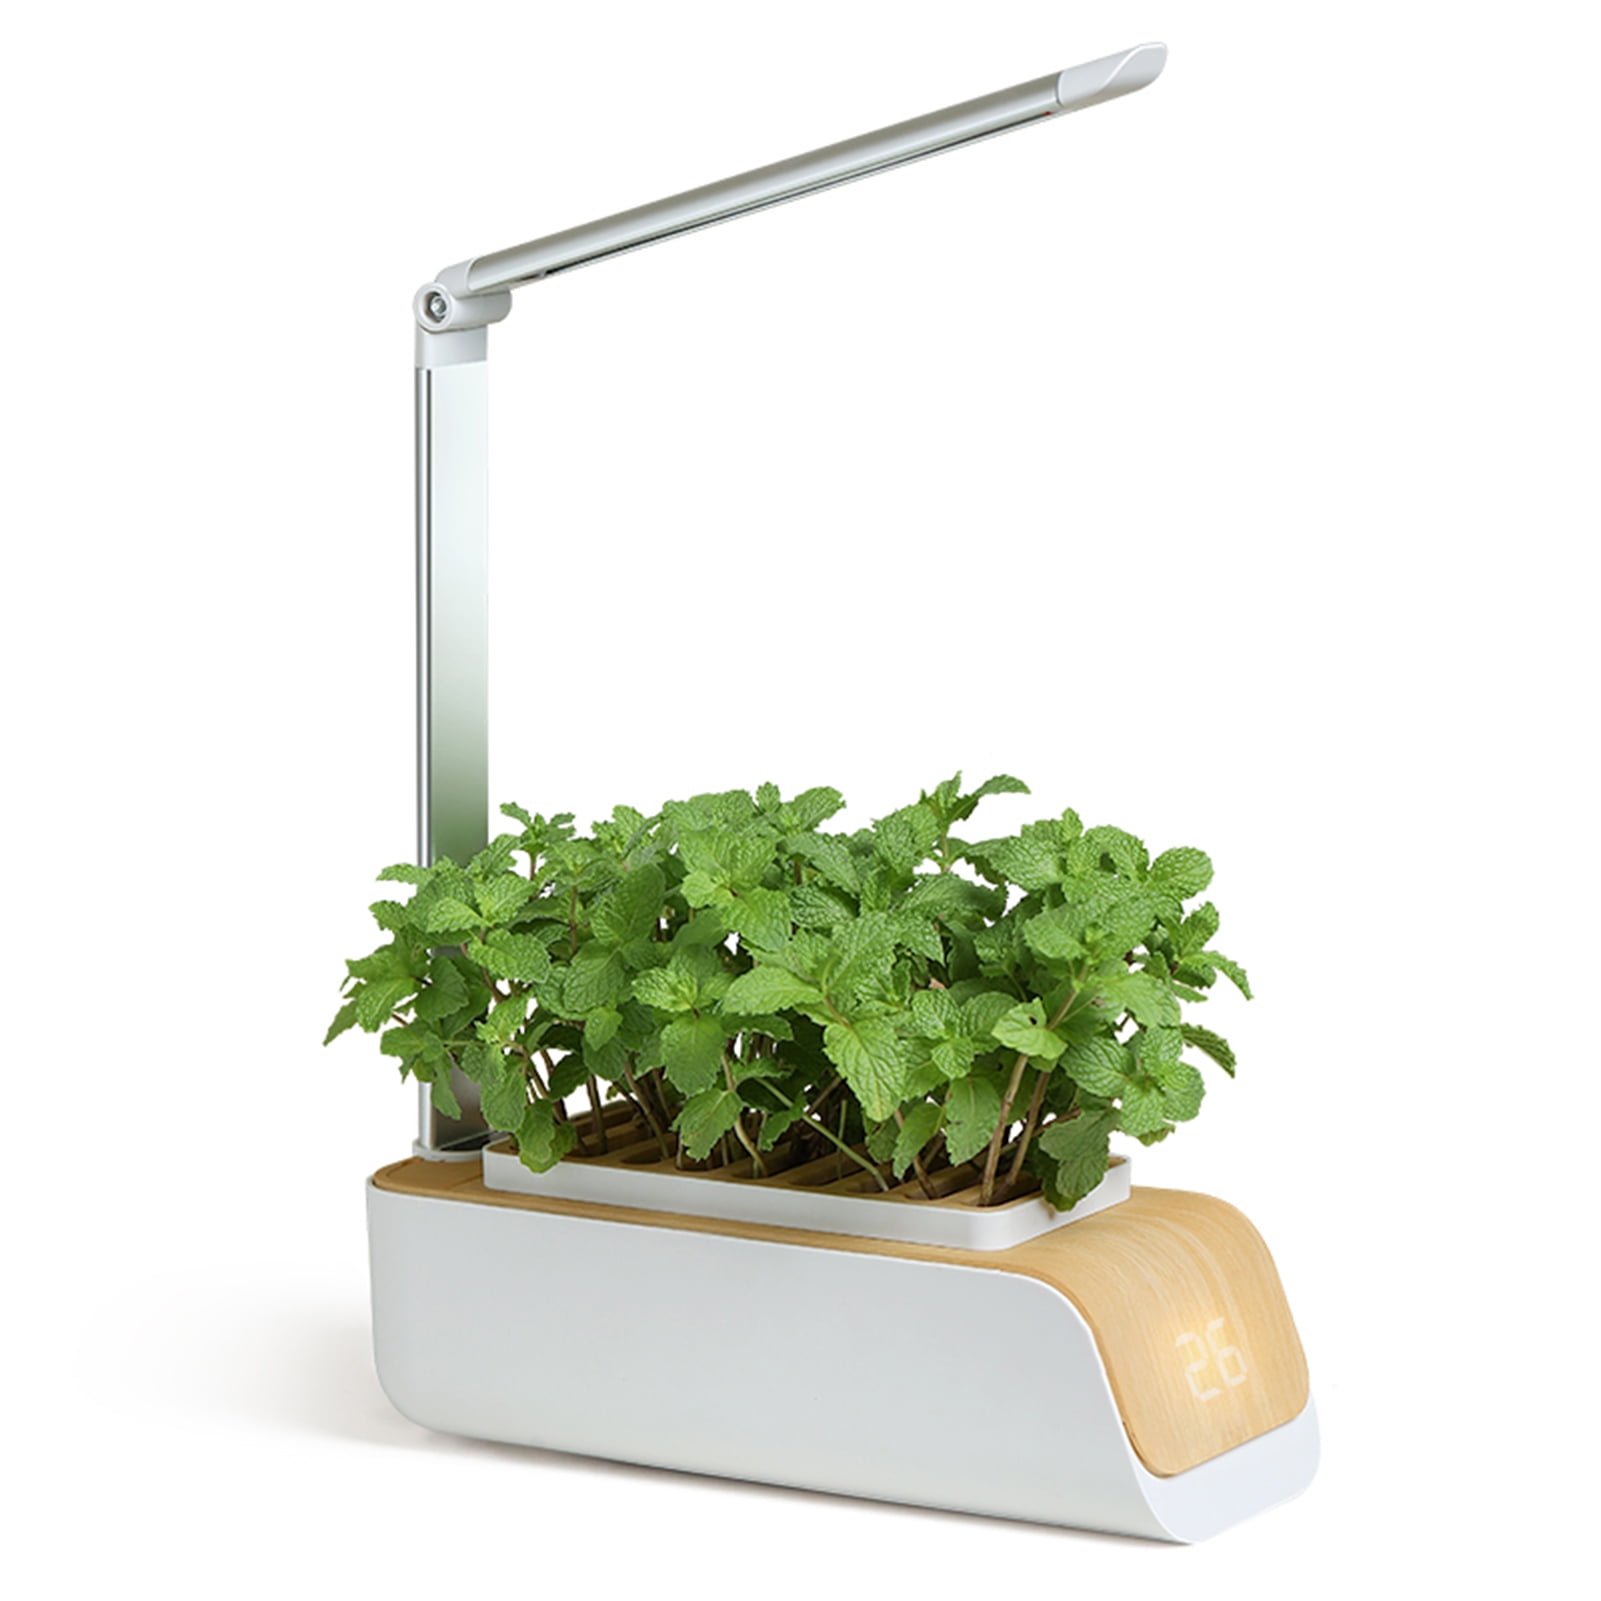 Hydroponics Growing System, Herb Garden Kit with Grow Smart Garden for Home and Kitchen, Indoor Plant Growing System, Herb Vegetable Gardening System - Walmart.com